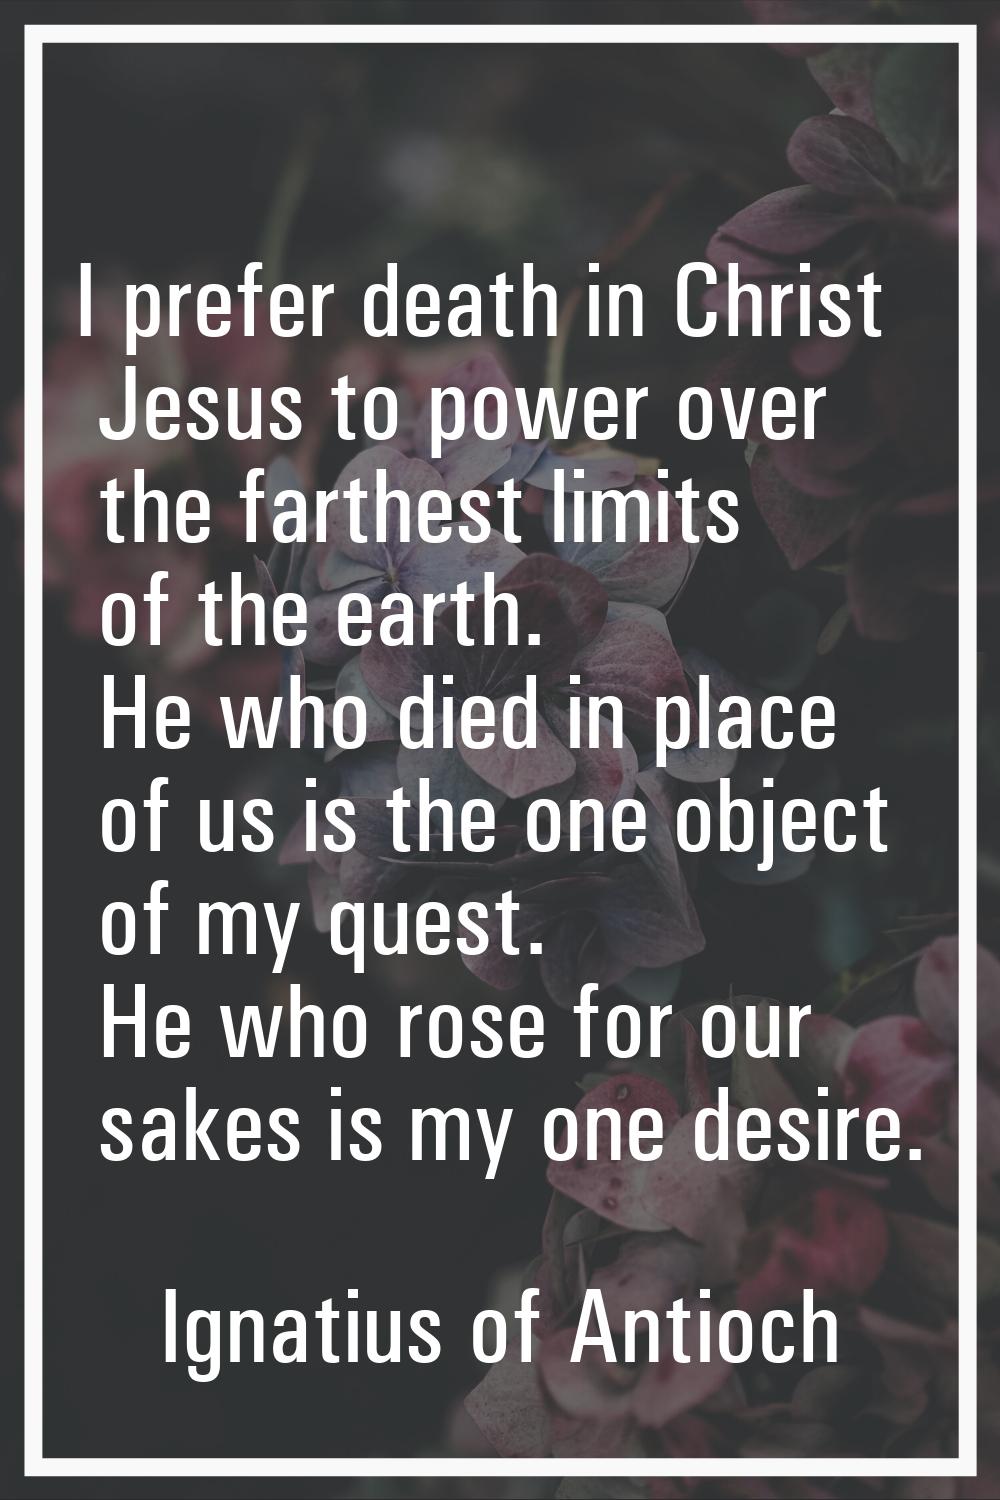 I prefer death in Christ Jesus to power over the farthest limits of the earth. He who died in place